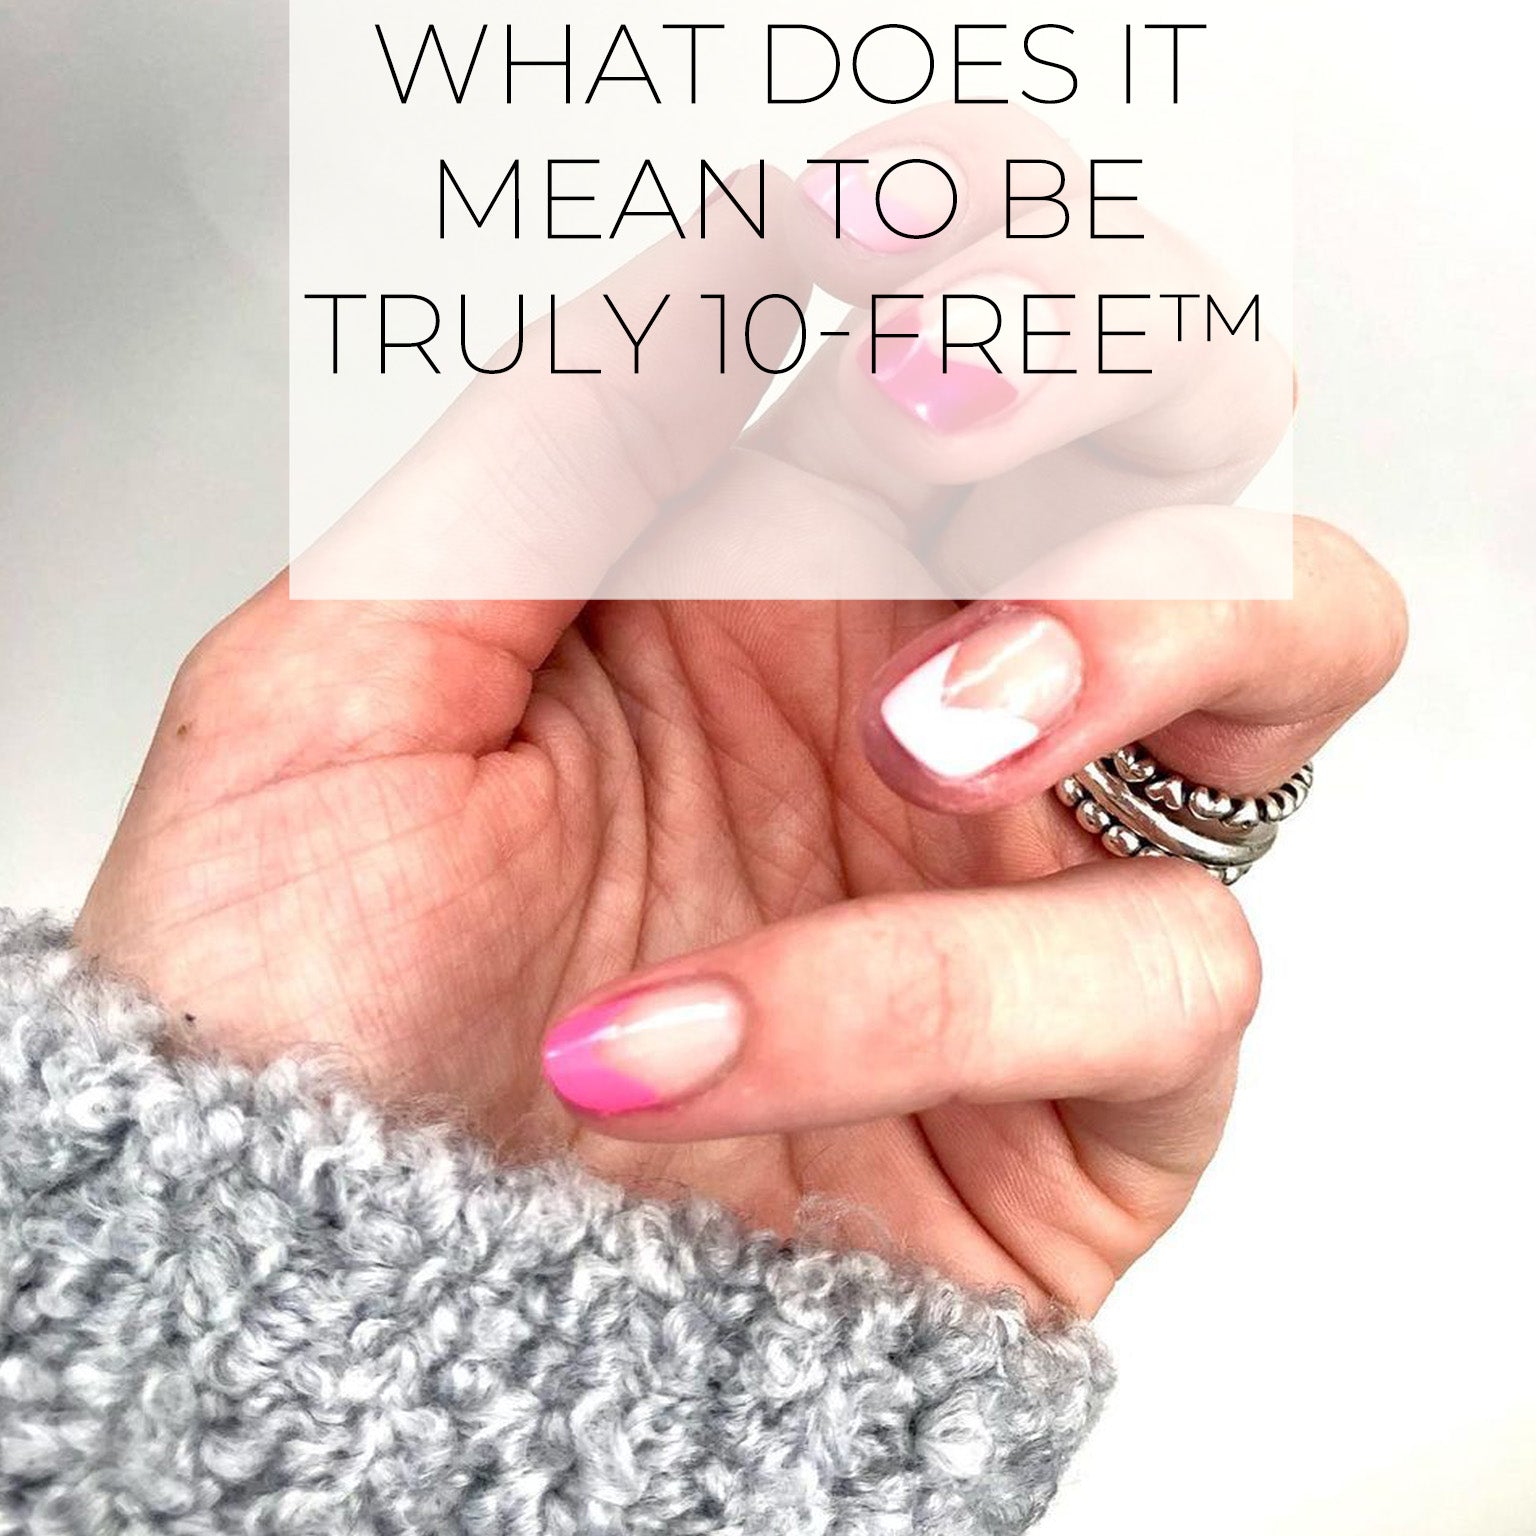 What does it mean to be TRULY 10-FREE™?